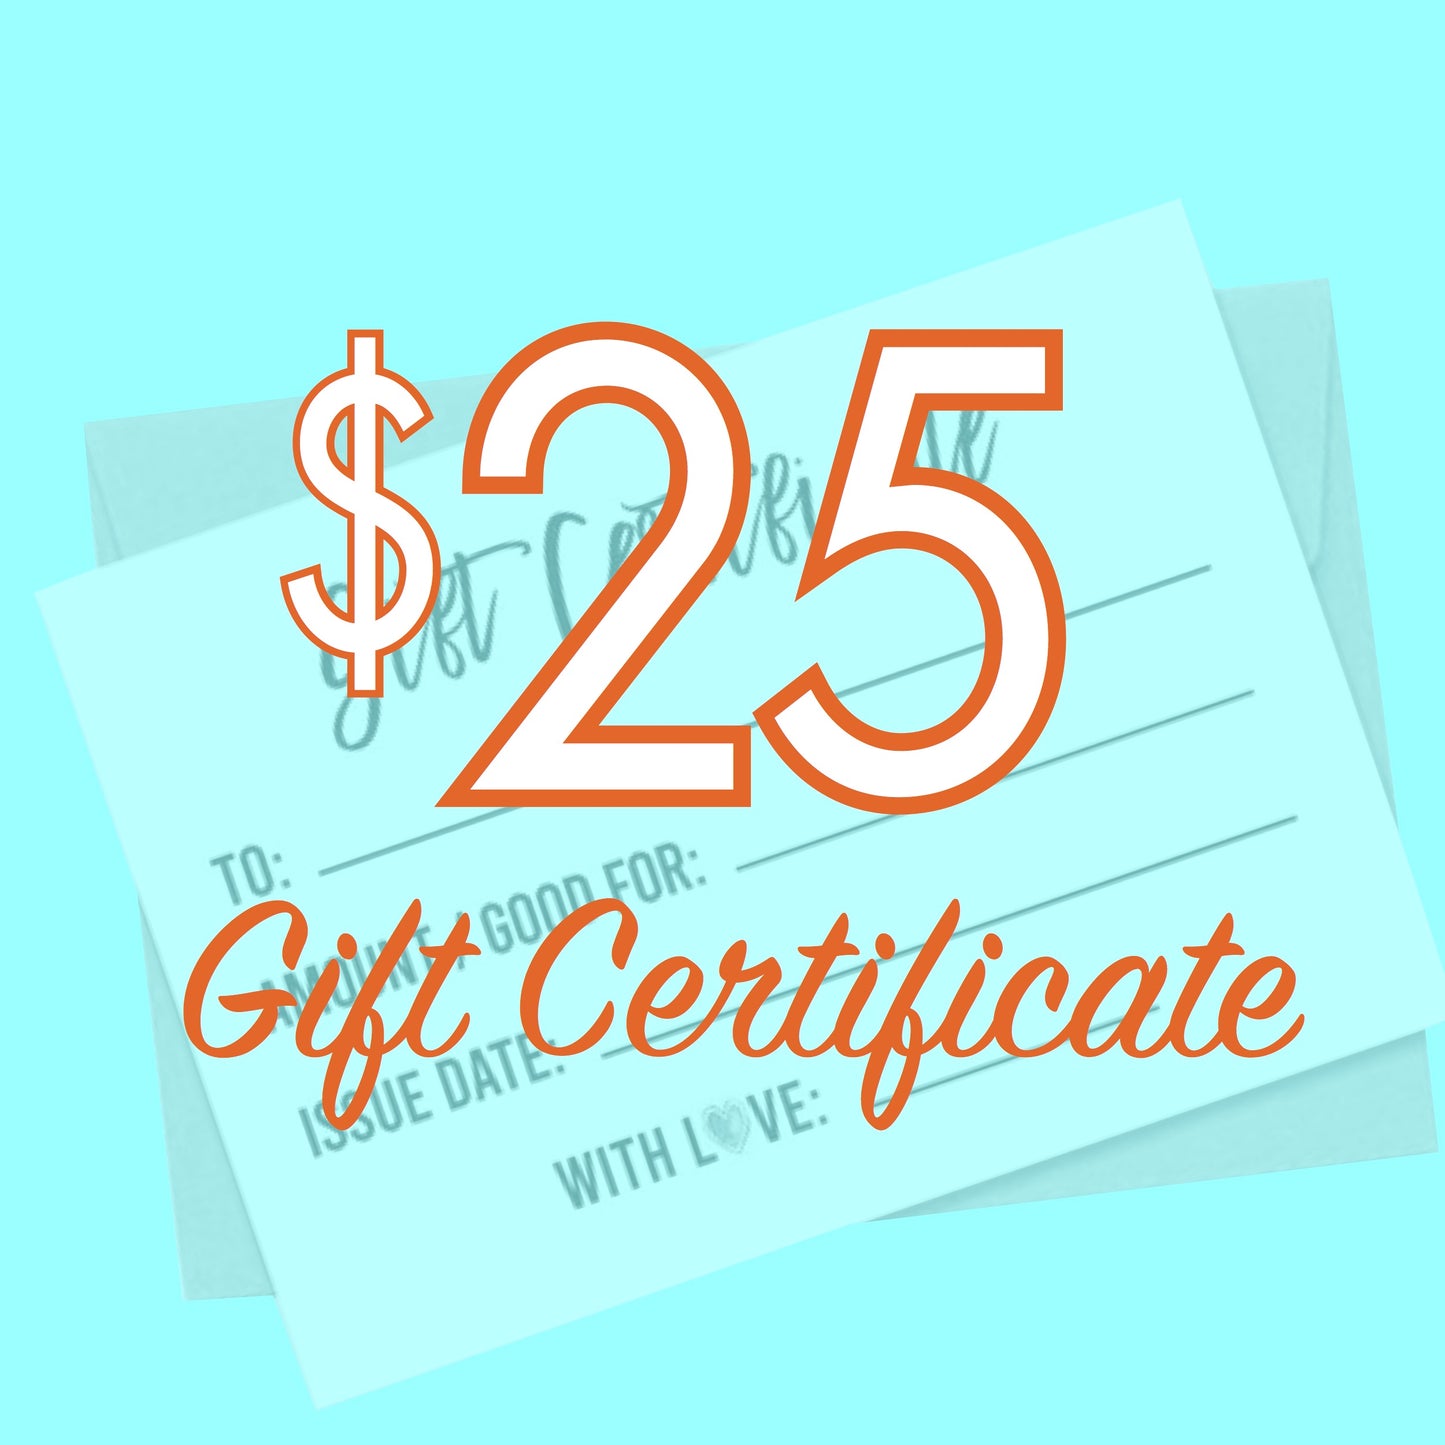 To Spend In-Store $25 Gift Certificate